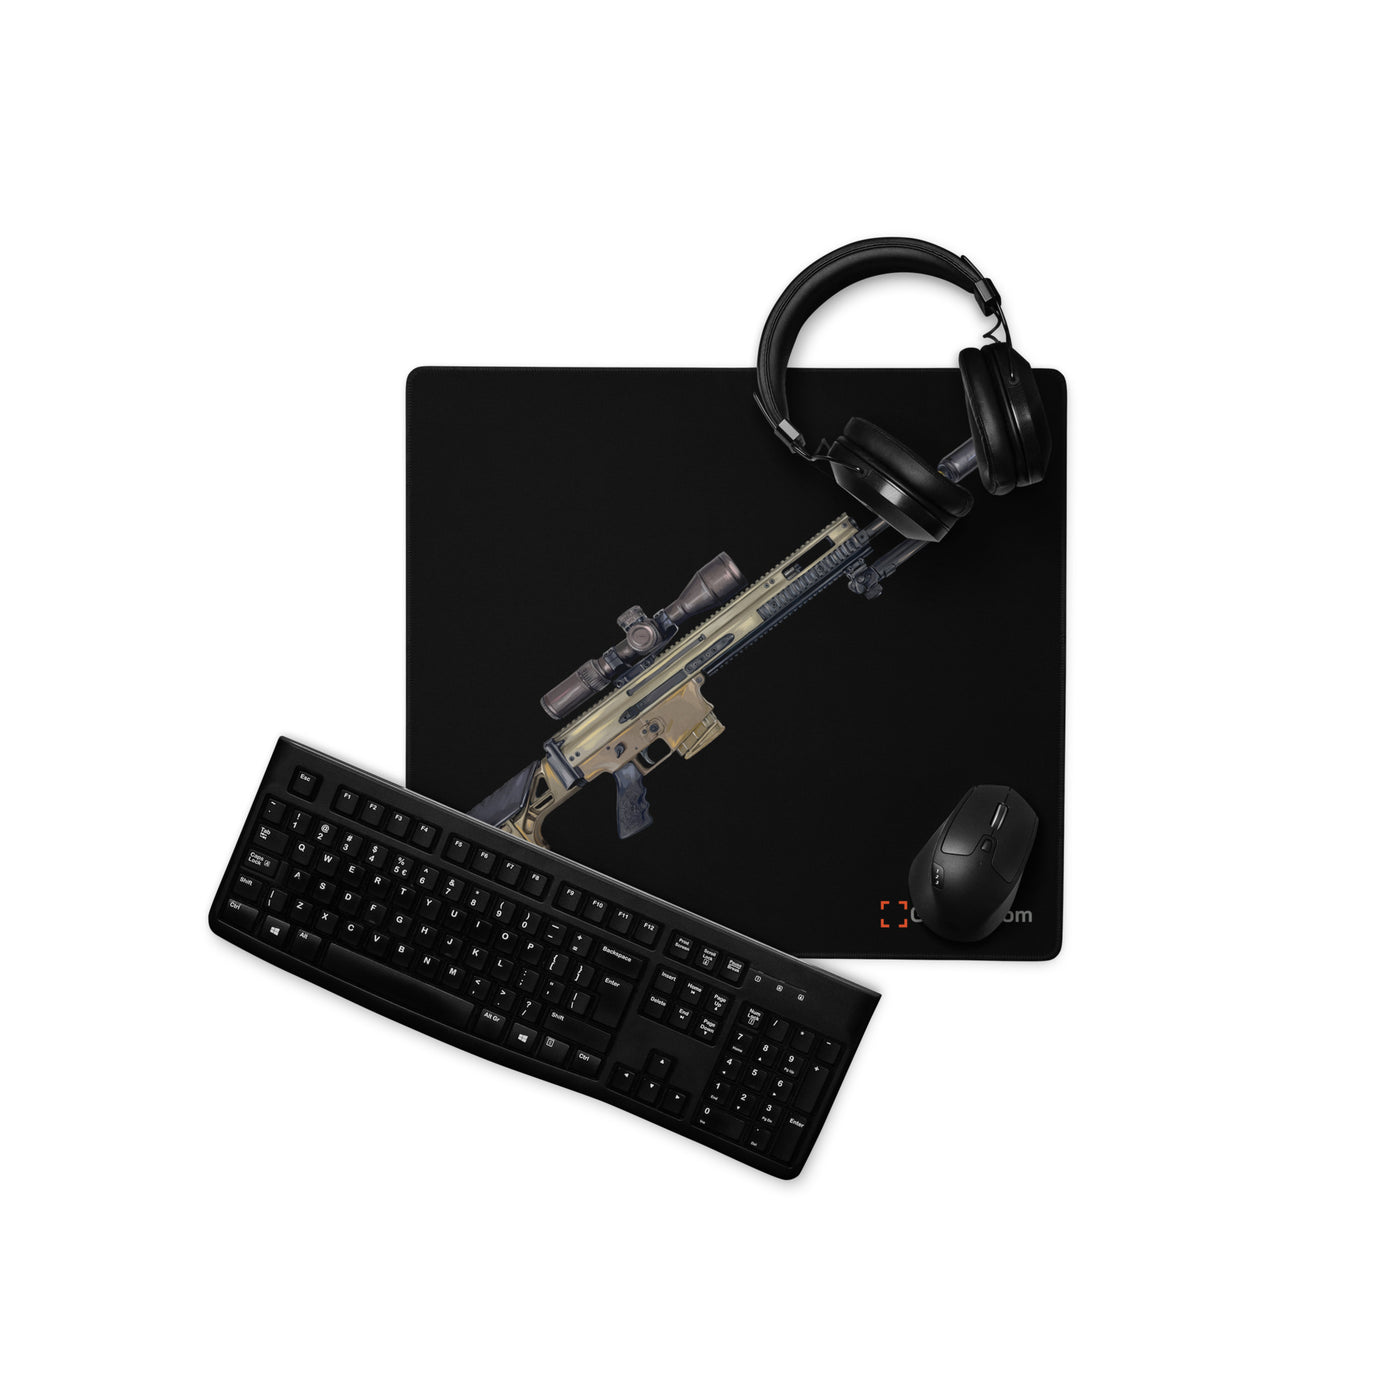 Socom Sniper Rifle Gaming Mouse Pad - Just The Piece - Black Background